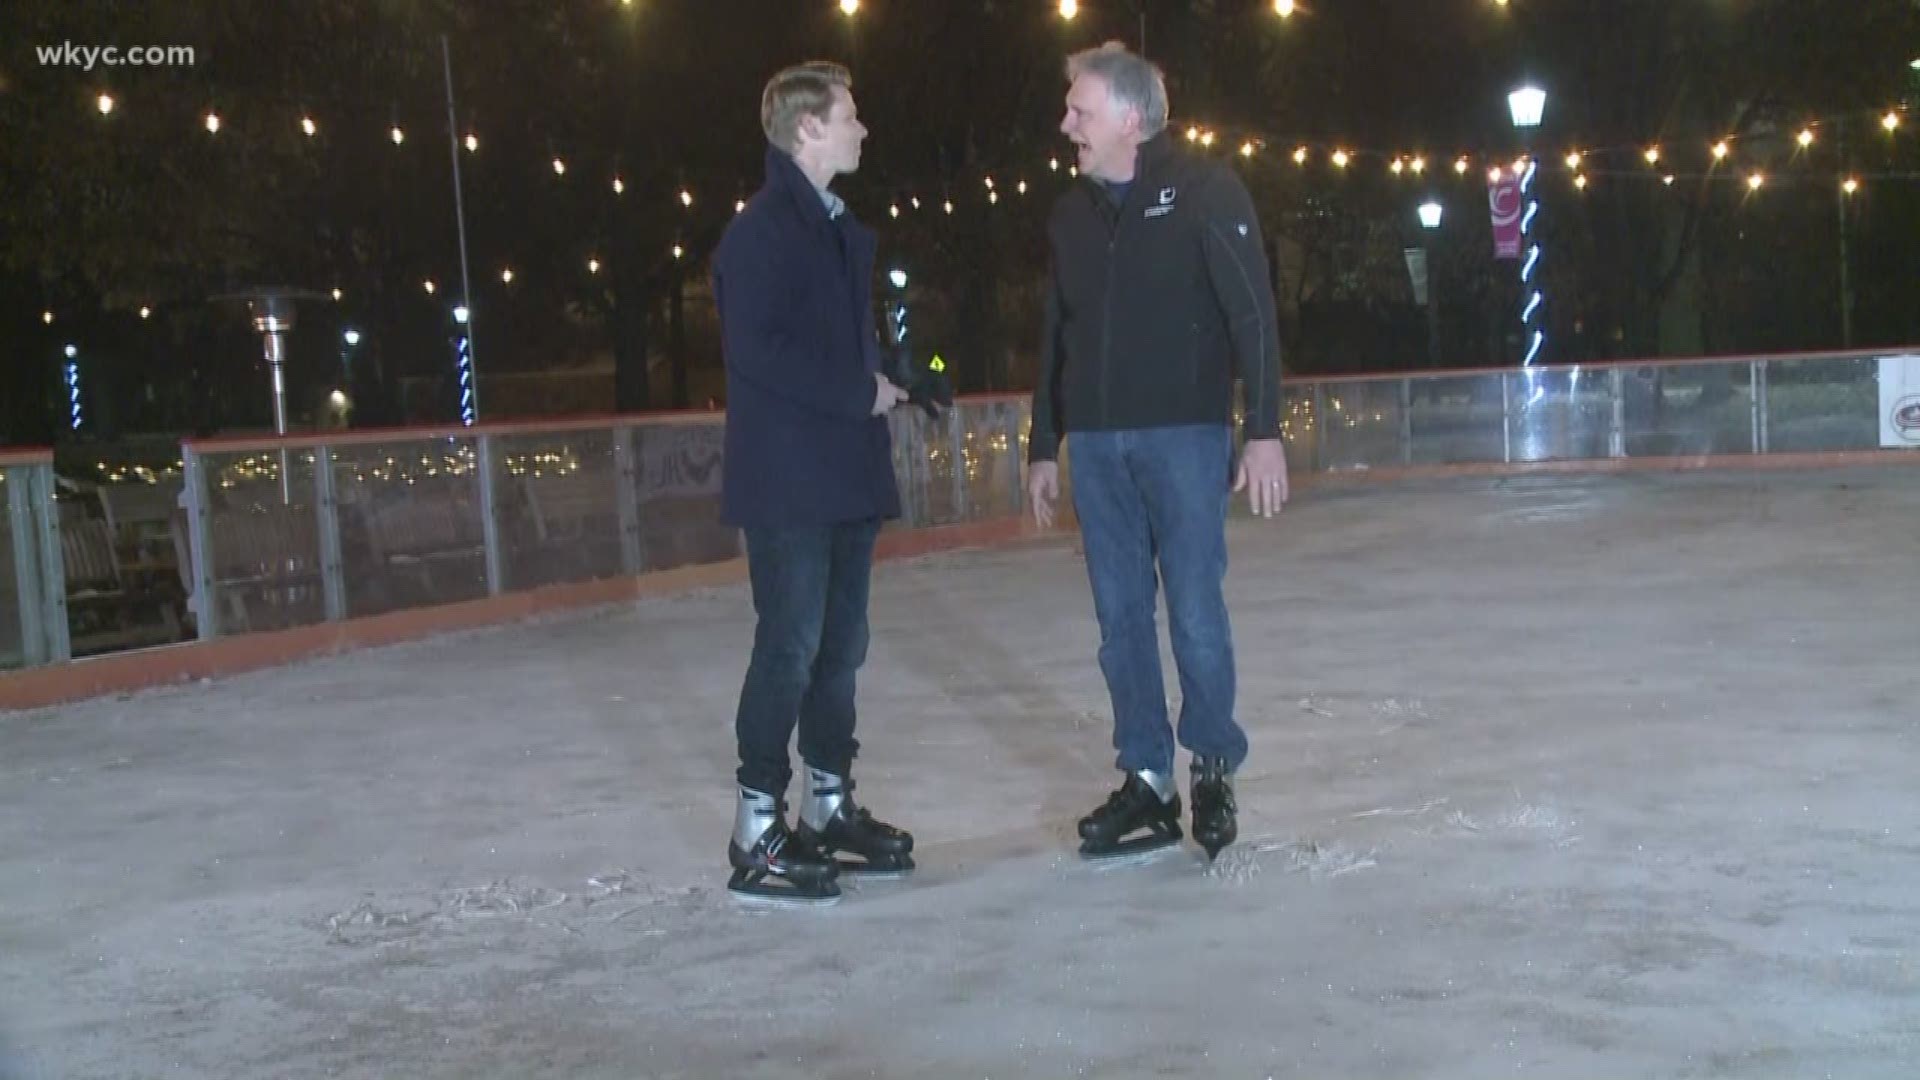 Nov. 30, 2018: Holiday CircleFest is back for its 25th year, and Austin Love strapped on the ice skates to kick off the celebration.